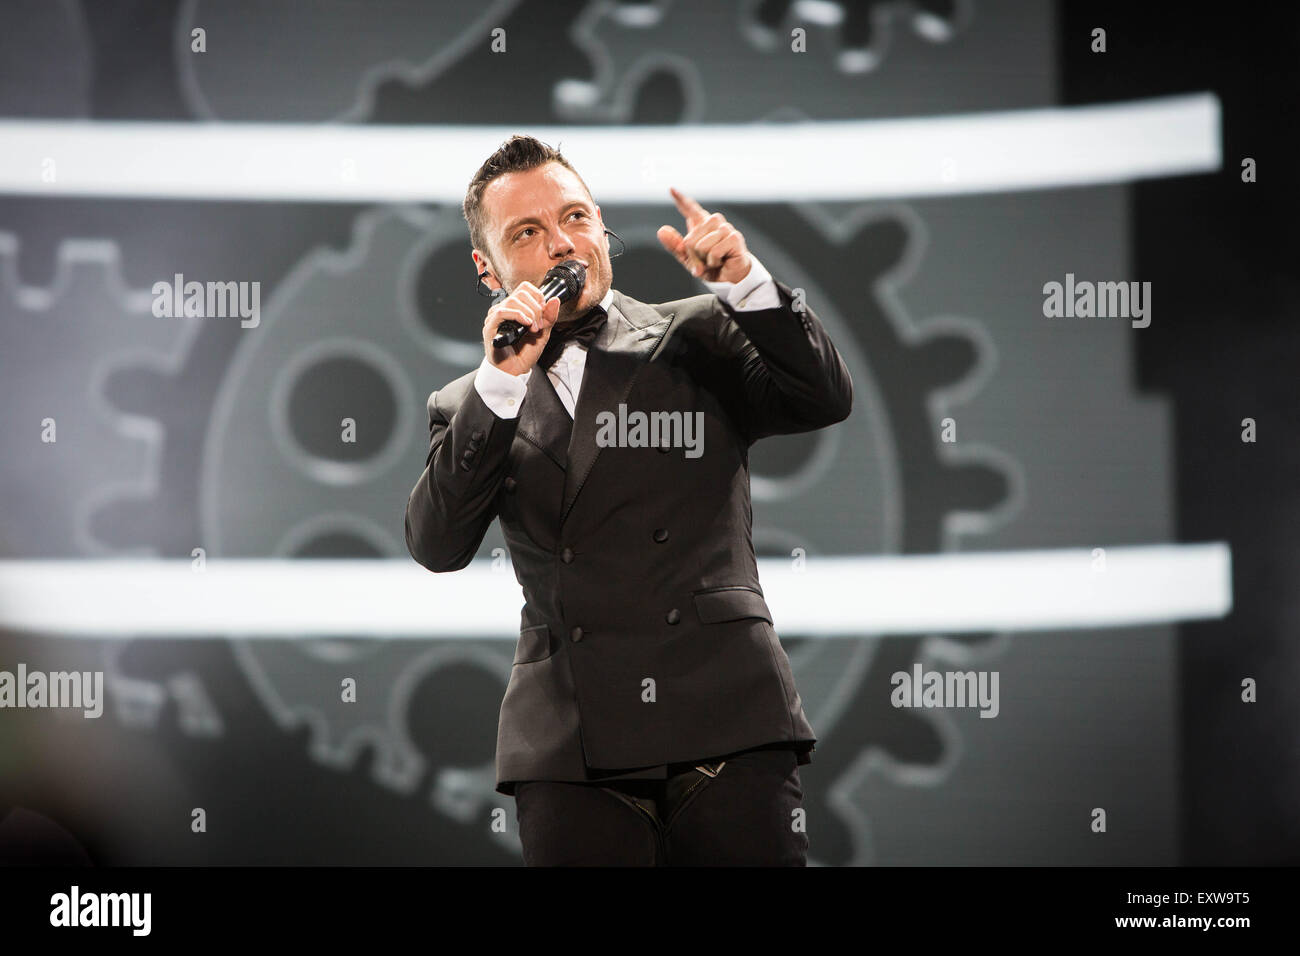 Tiziano Ferro High Resolution Stock Photography and Images - Alamy